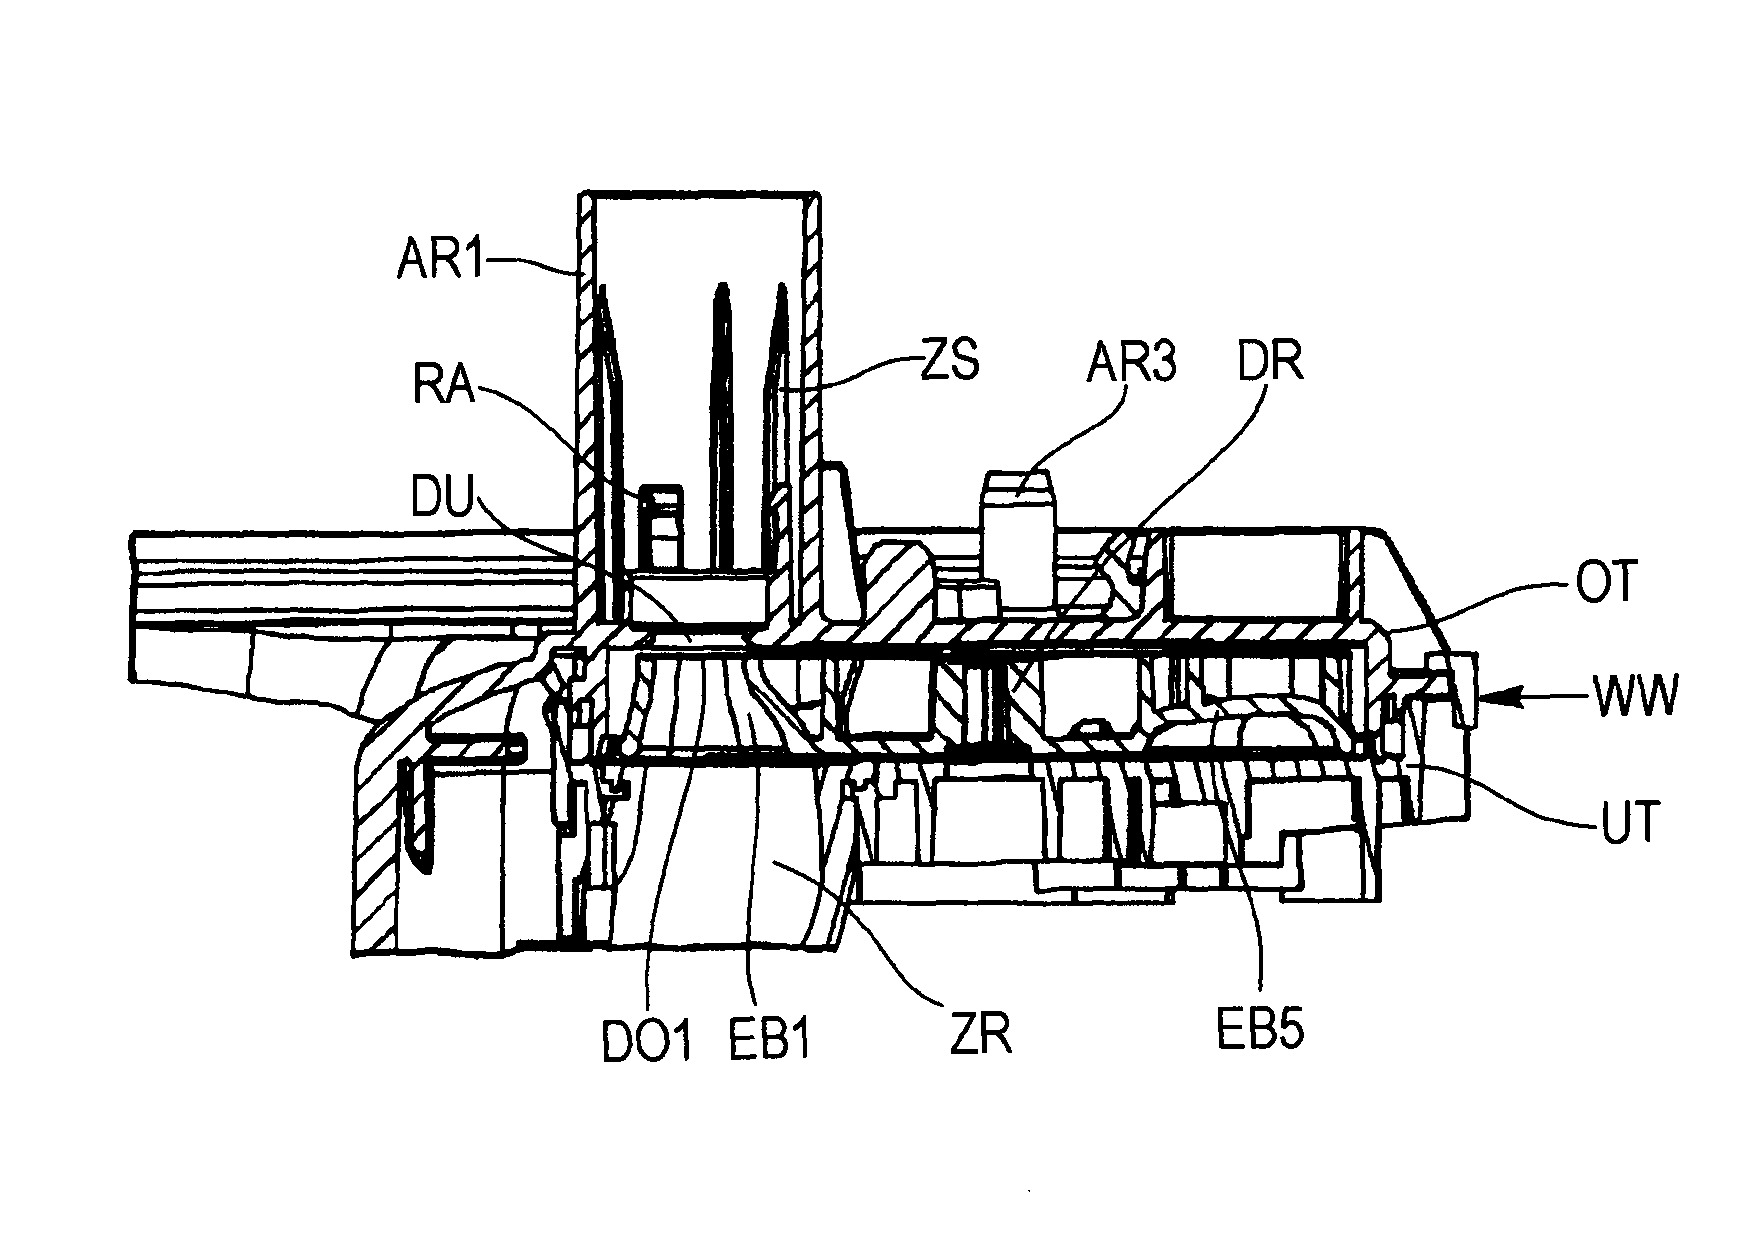 Water-carrying domestic appliance having a water-distribution mechanism